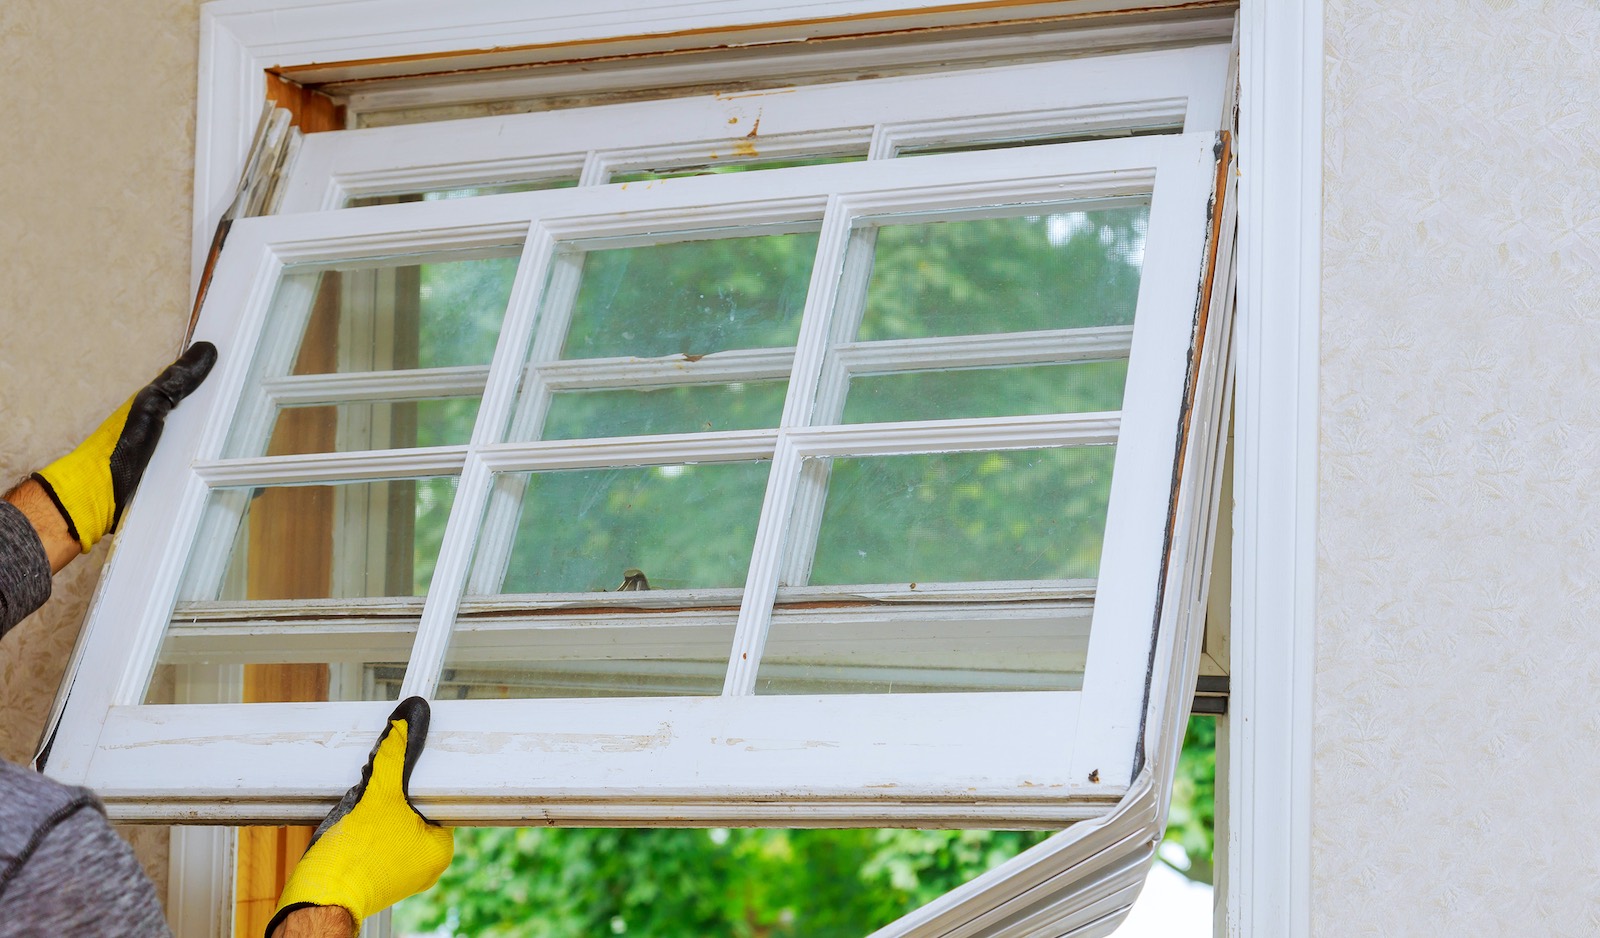 Replacing an older window with a new more energy efficient window.